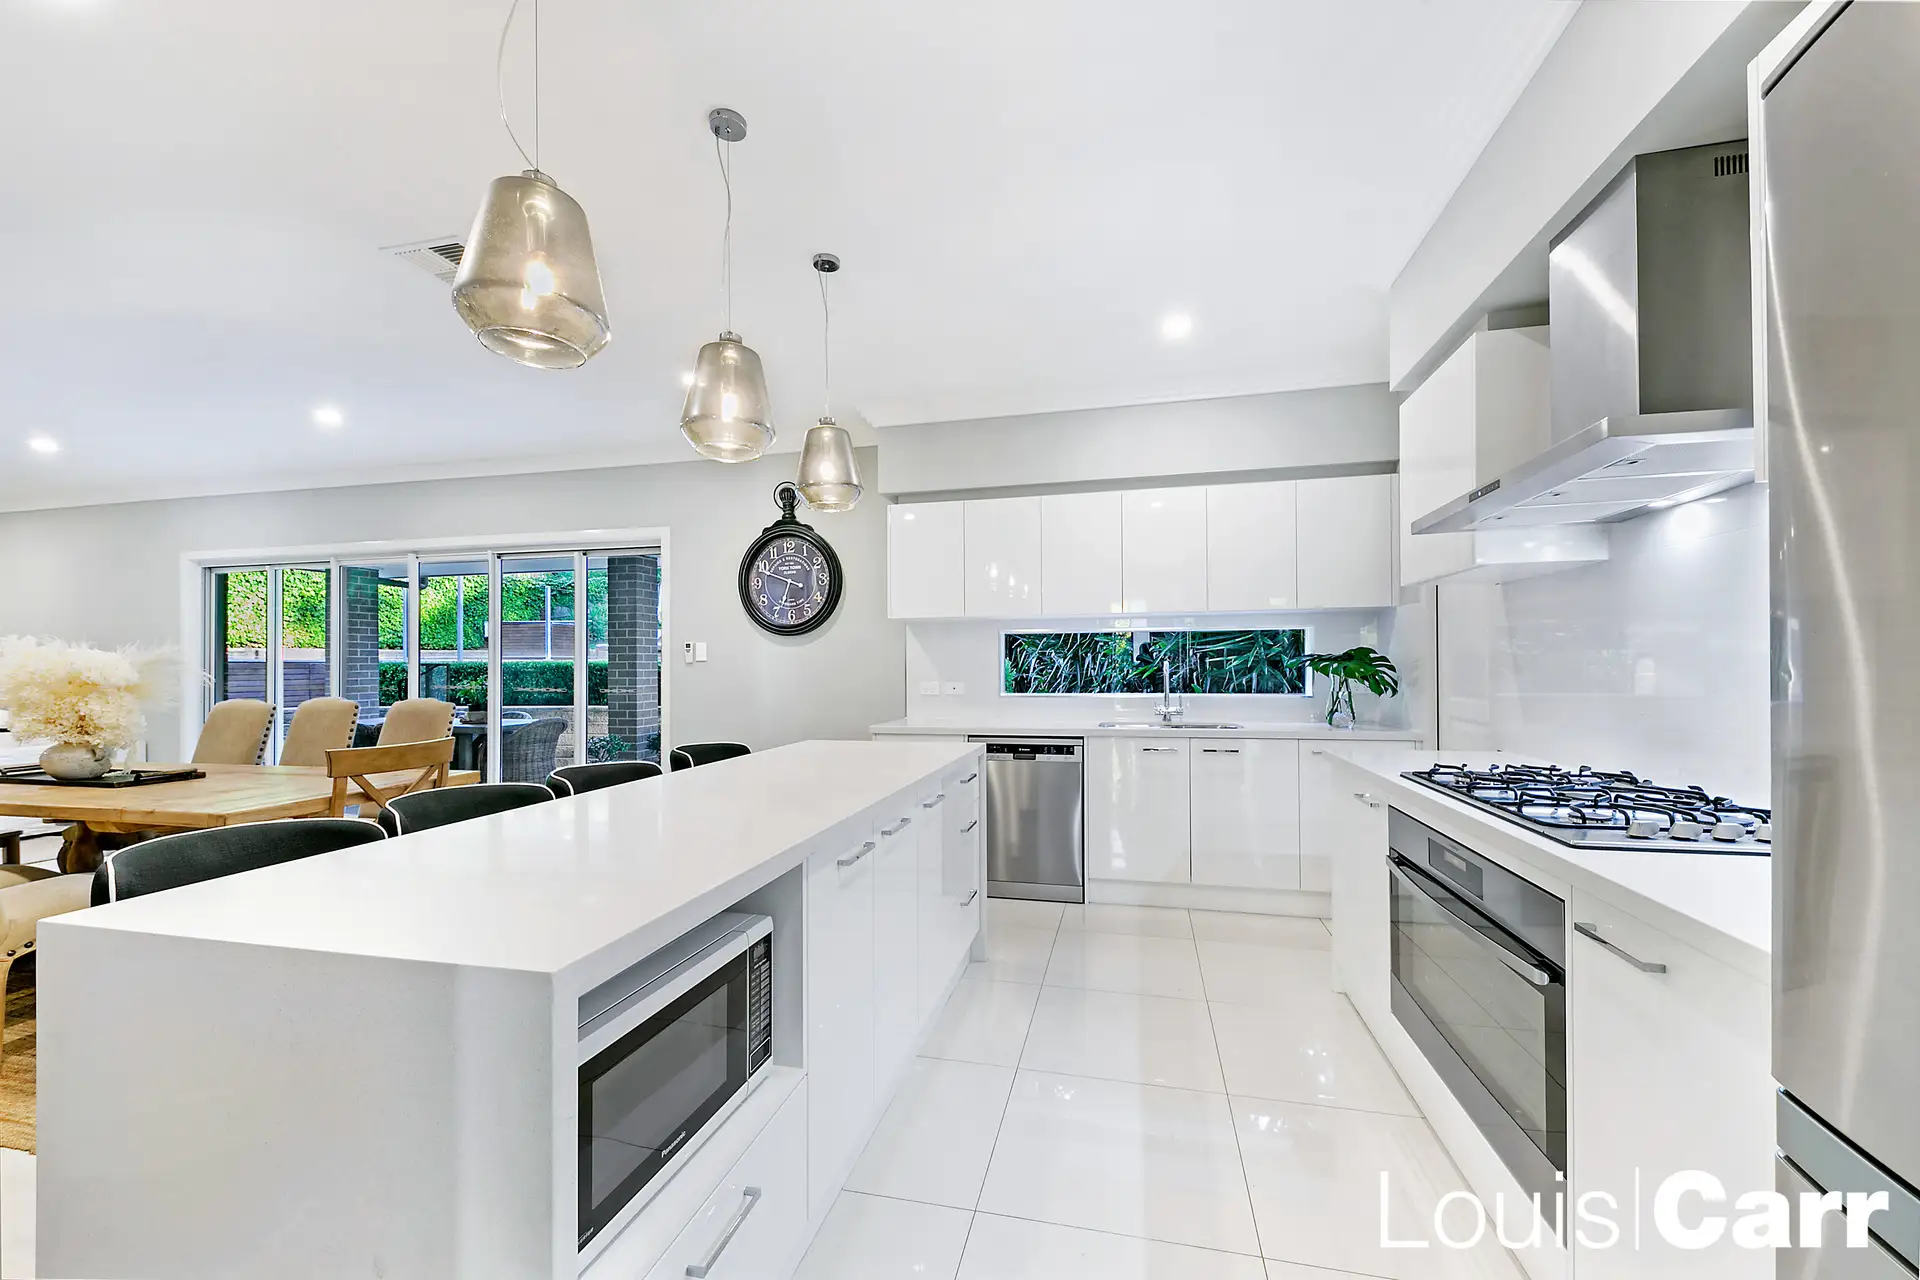 Photo #4: 1 Glenshee Place, Glenhaven - Sold by Louis Carr Real Estate